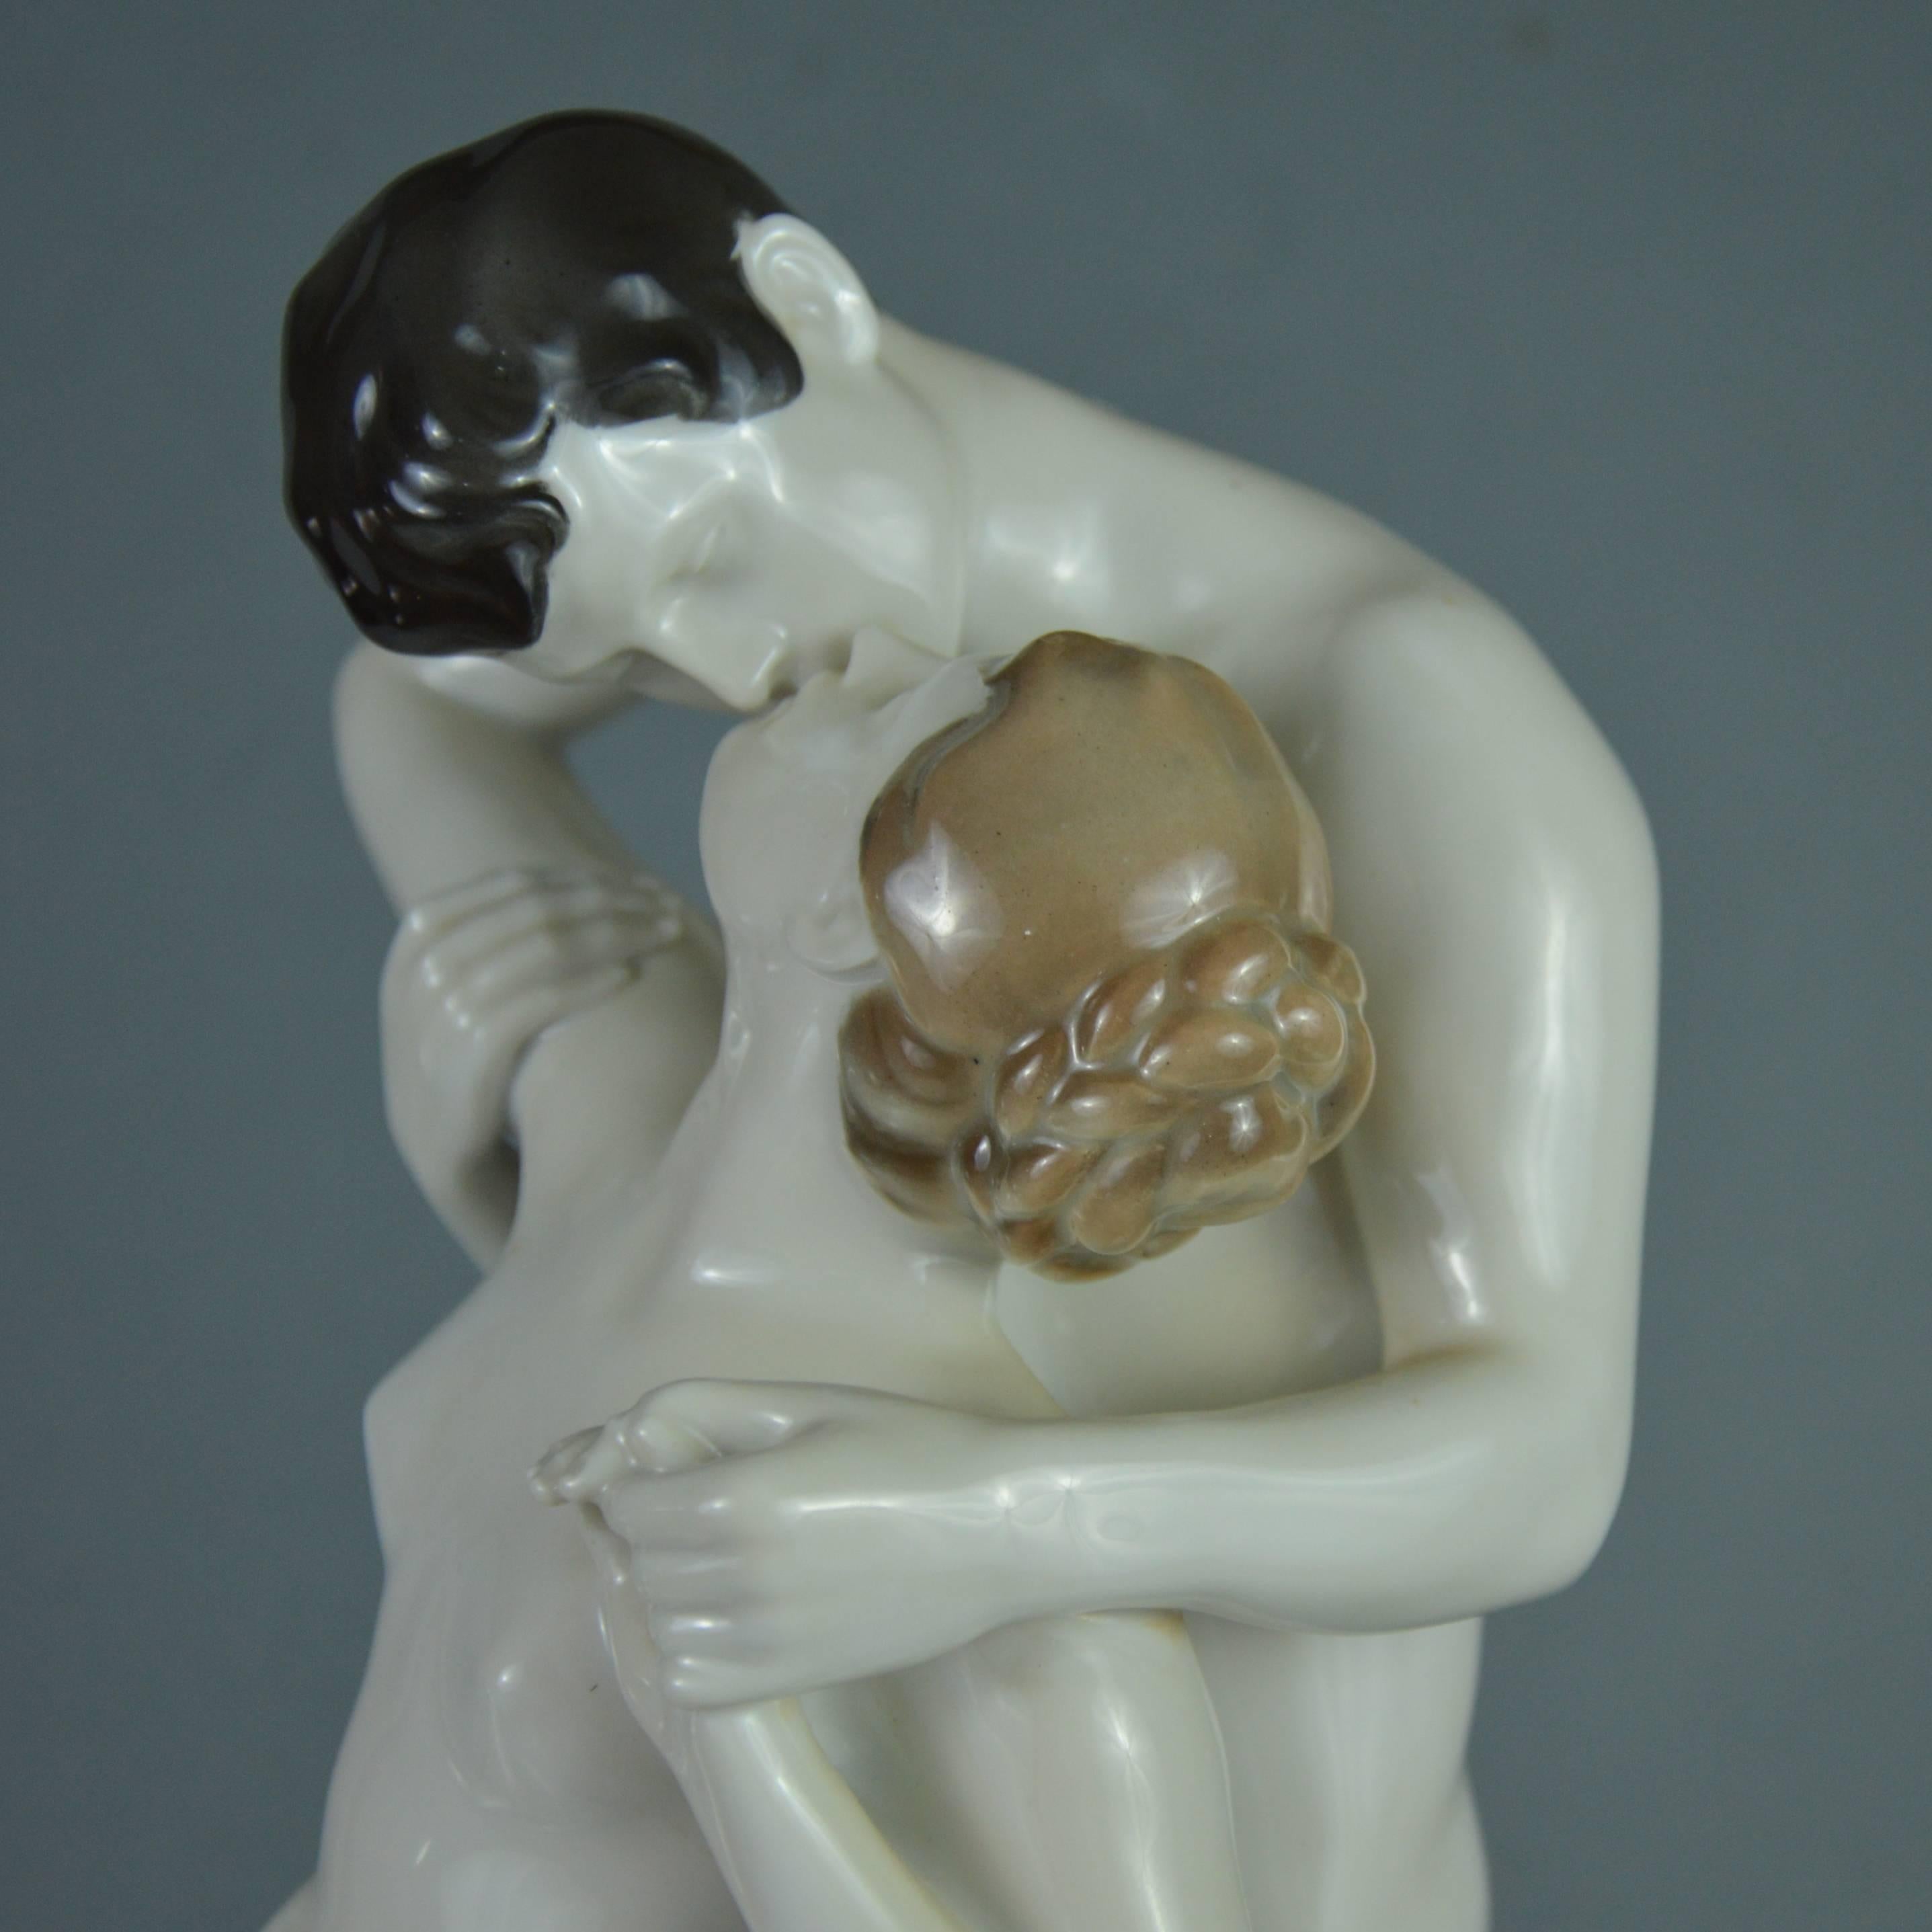 Early 20th Century Art Nouveau Rosenthal Porcelain Sculpture Spring of Love, Richard Aichner, 1918